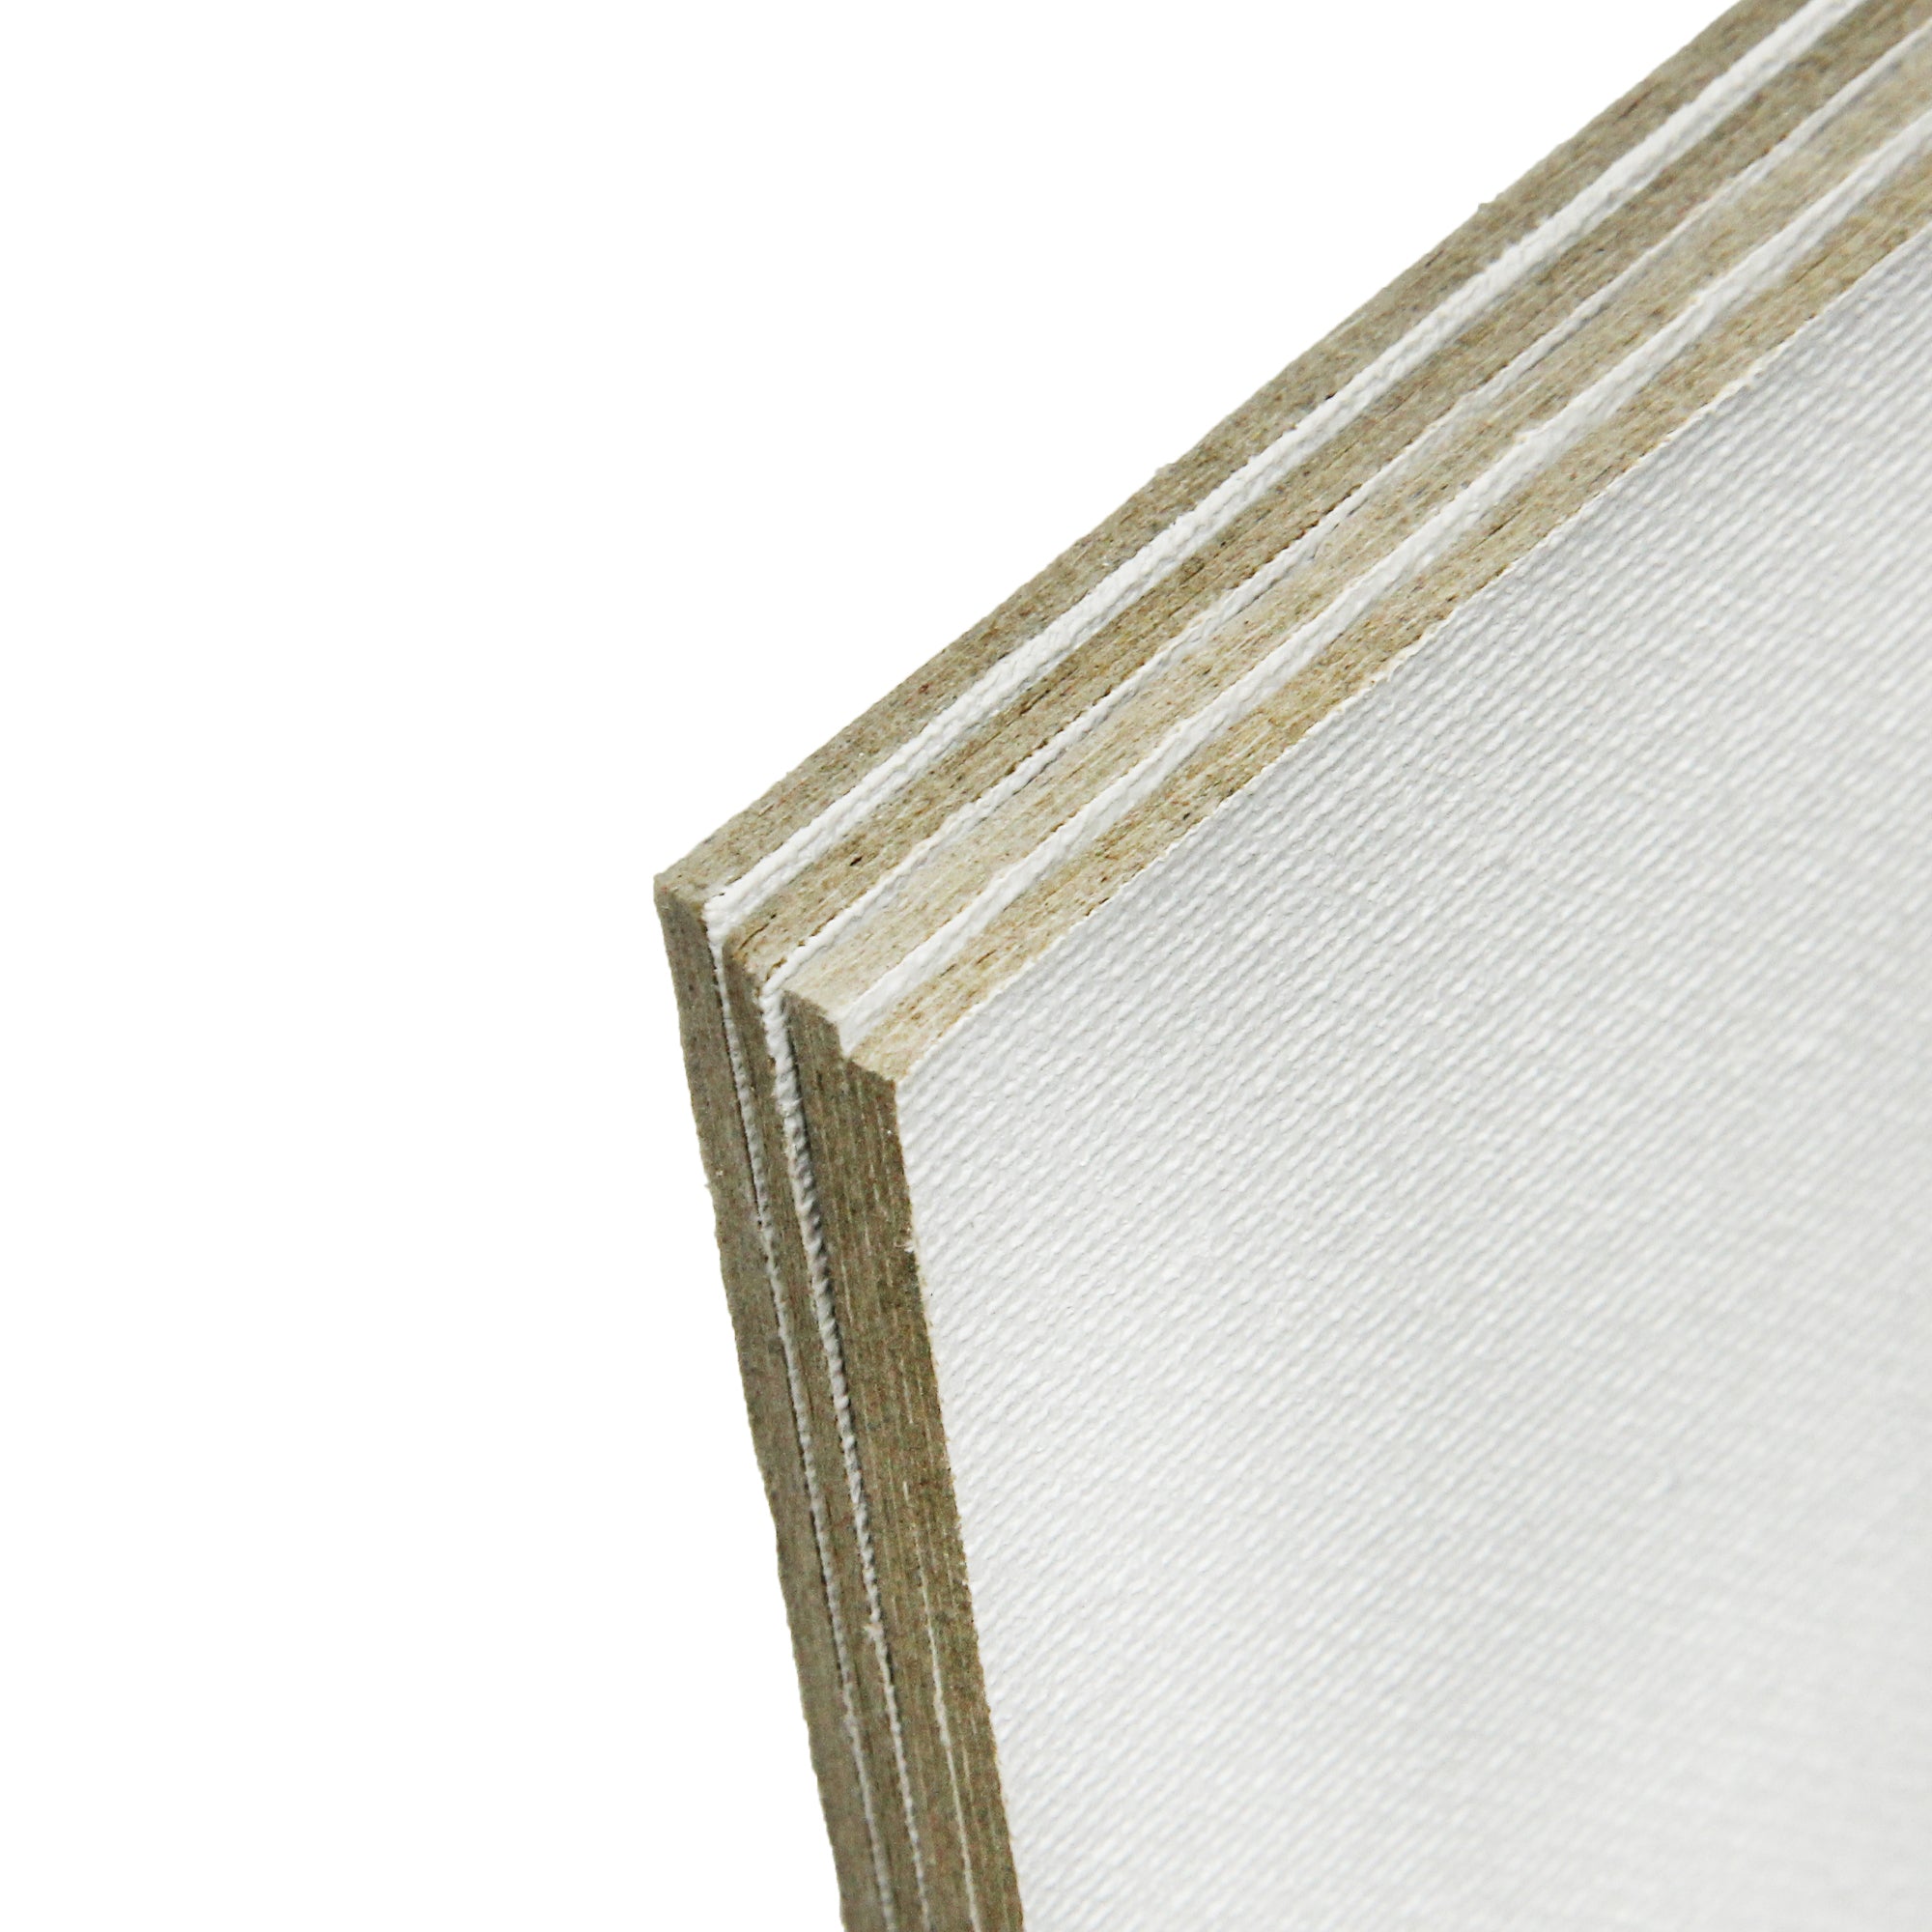 Canvas Board Square 10 X 10Inch 230Gsm 2Mm Thick 4Pc Shrink Lb